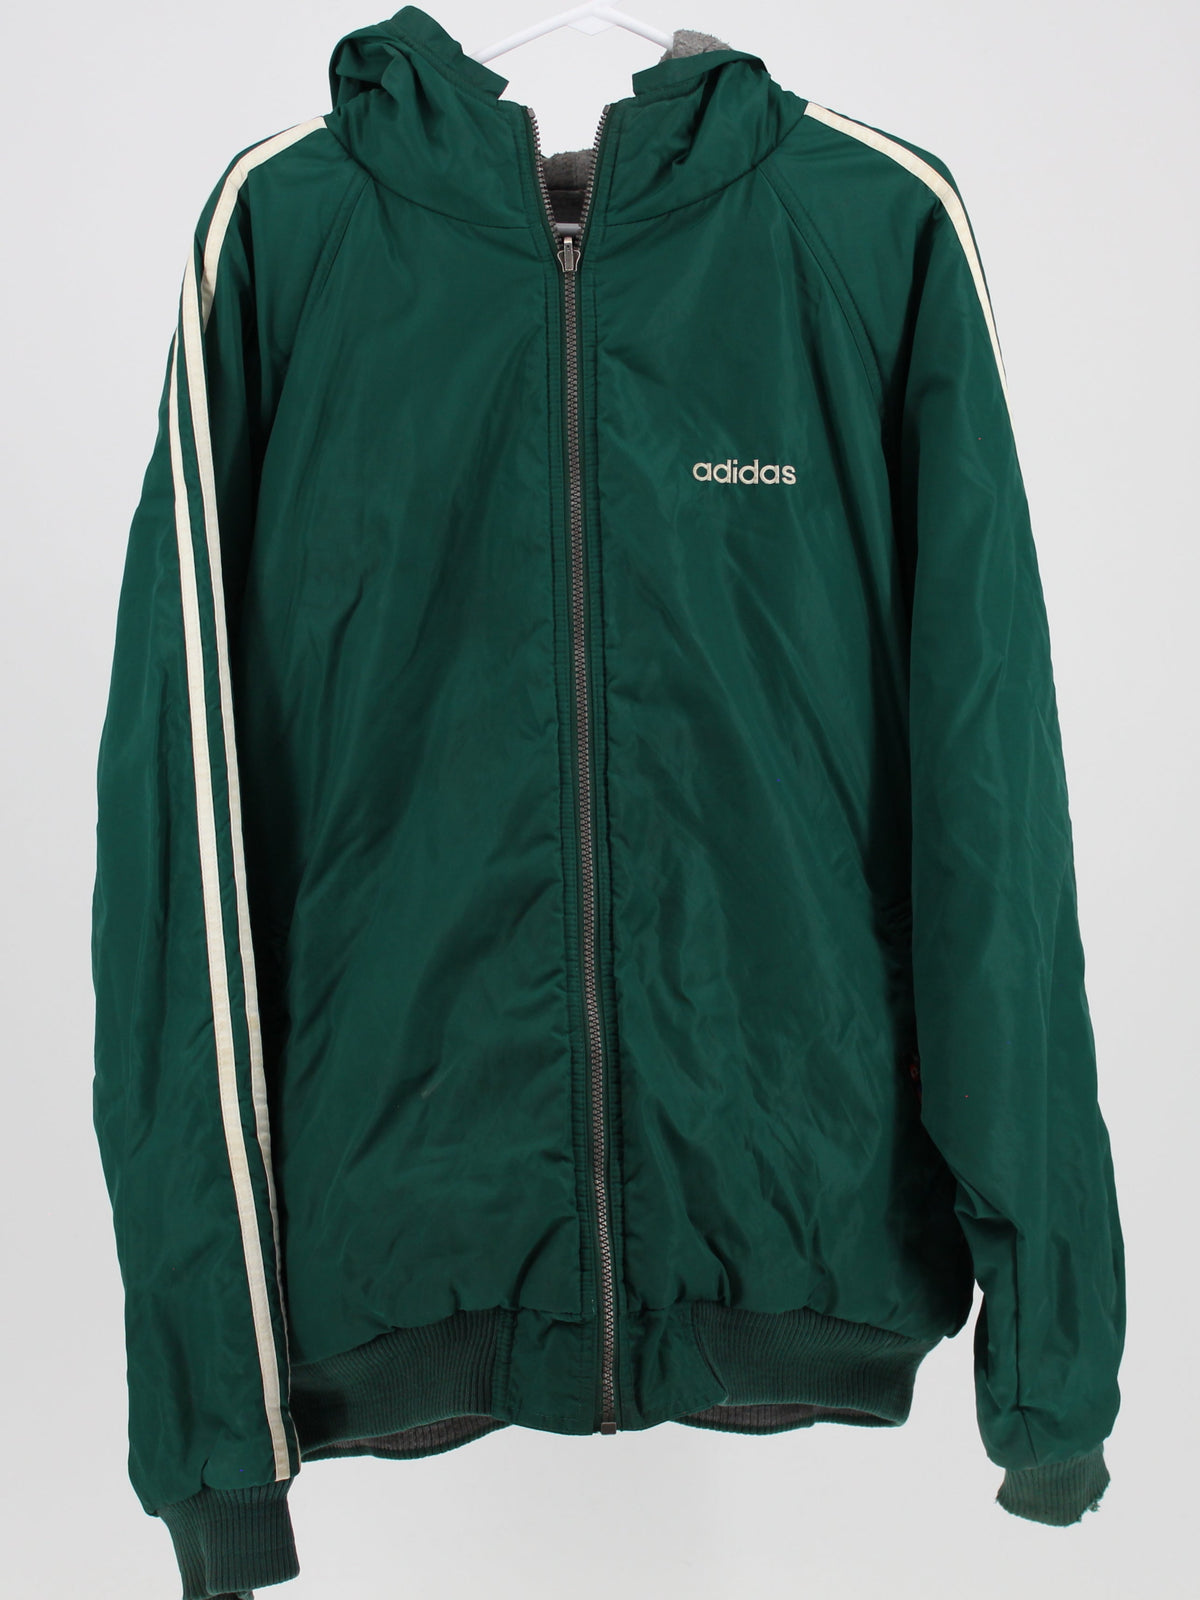 Adidas Reversable Hooded Green Zipper Jacket with Sleeve Stripes